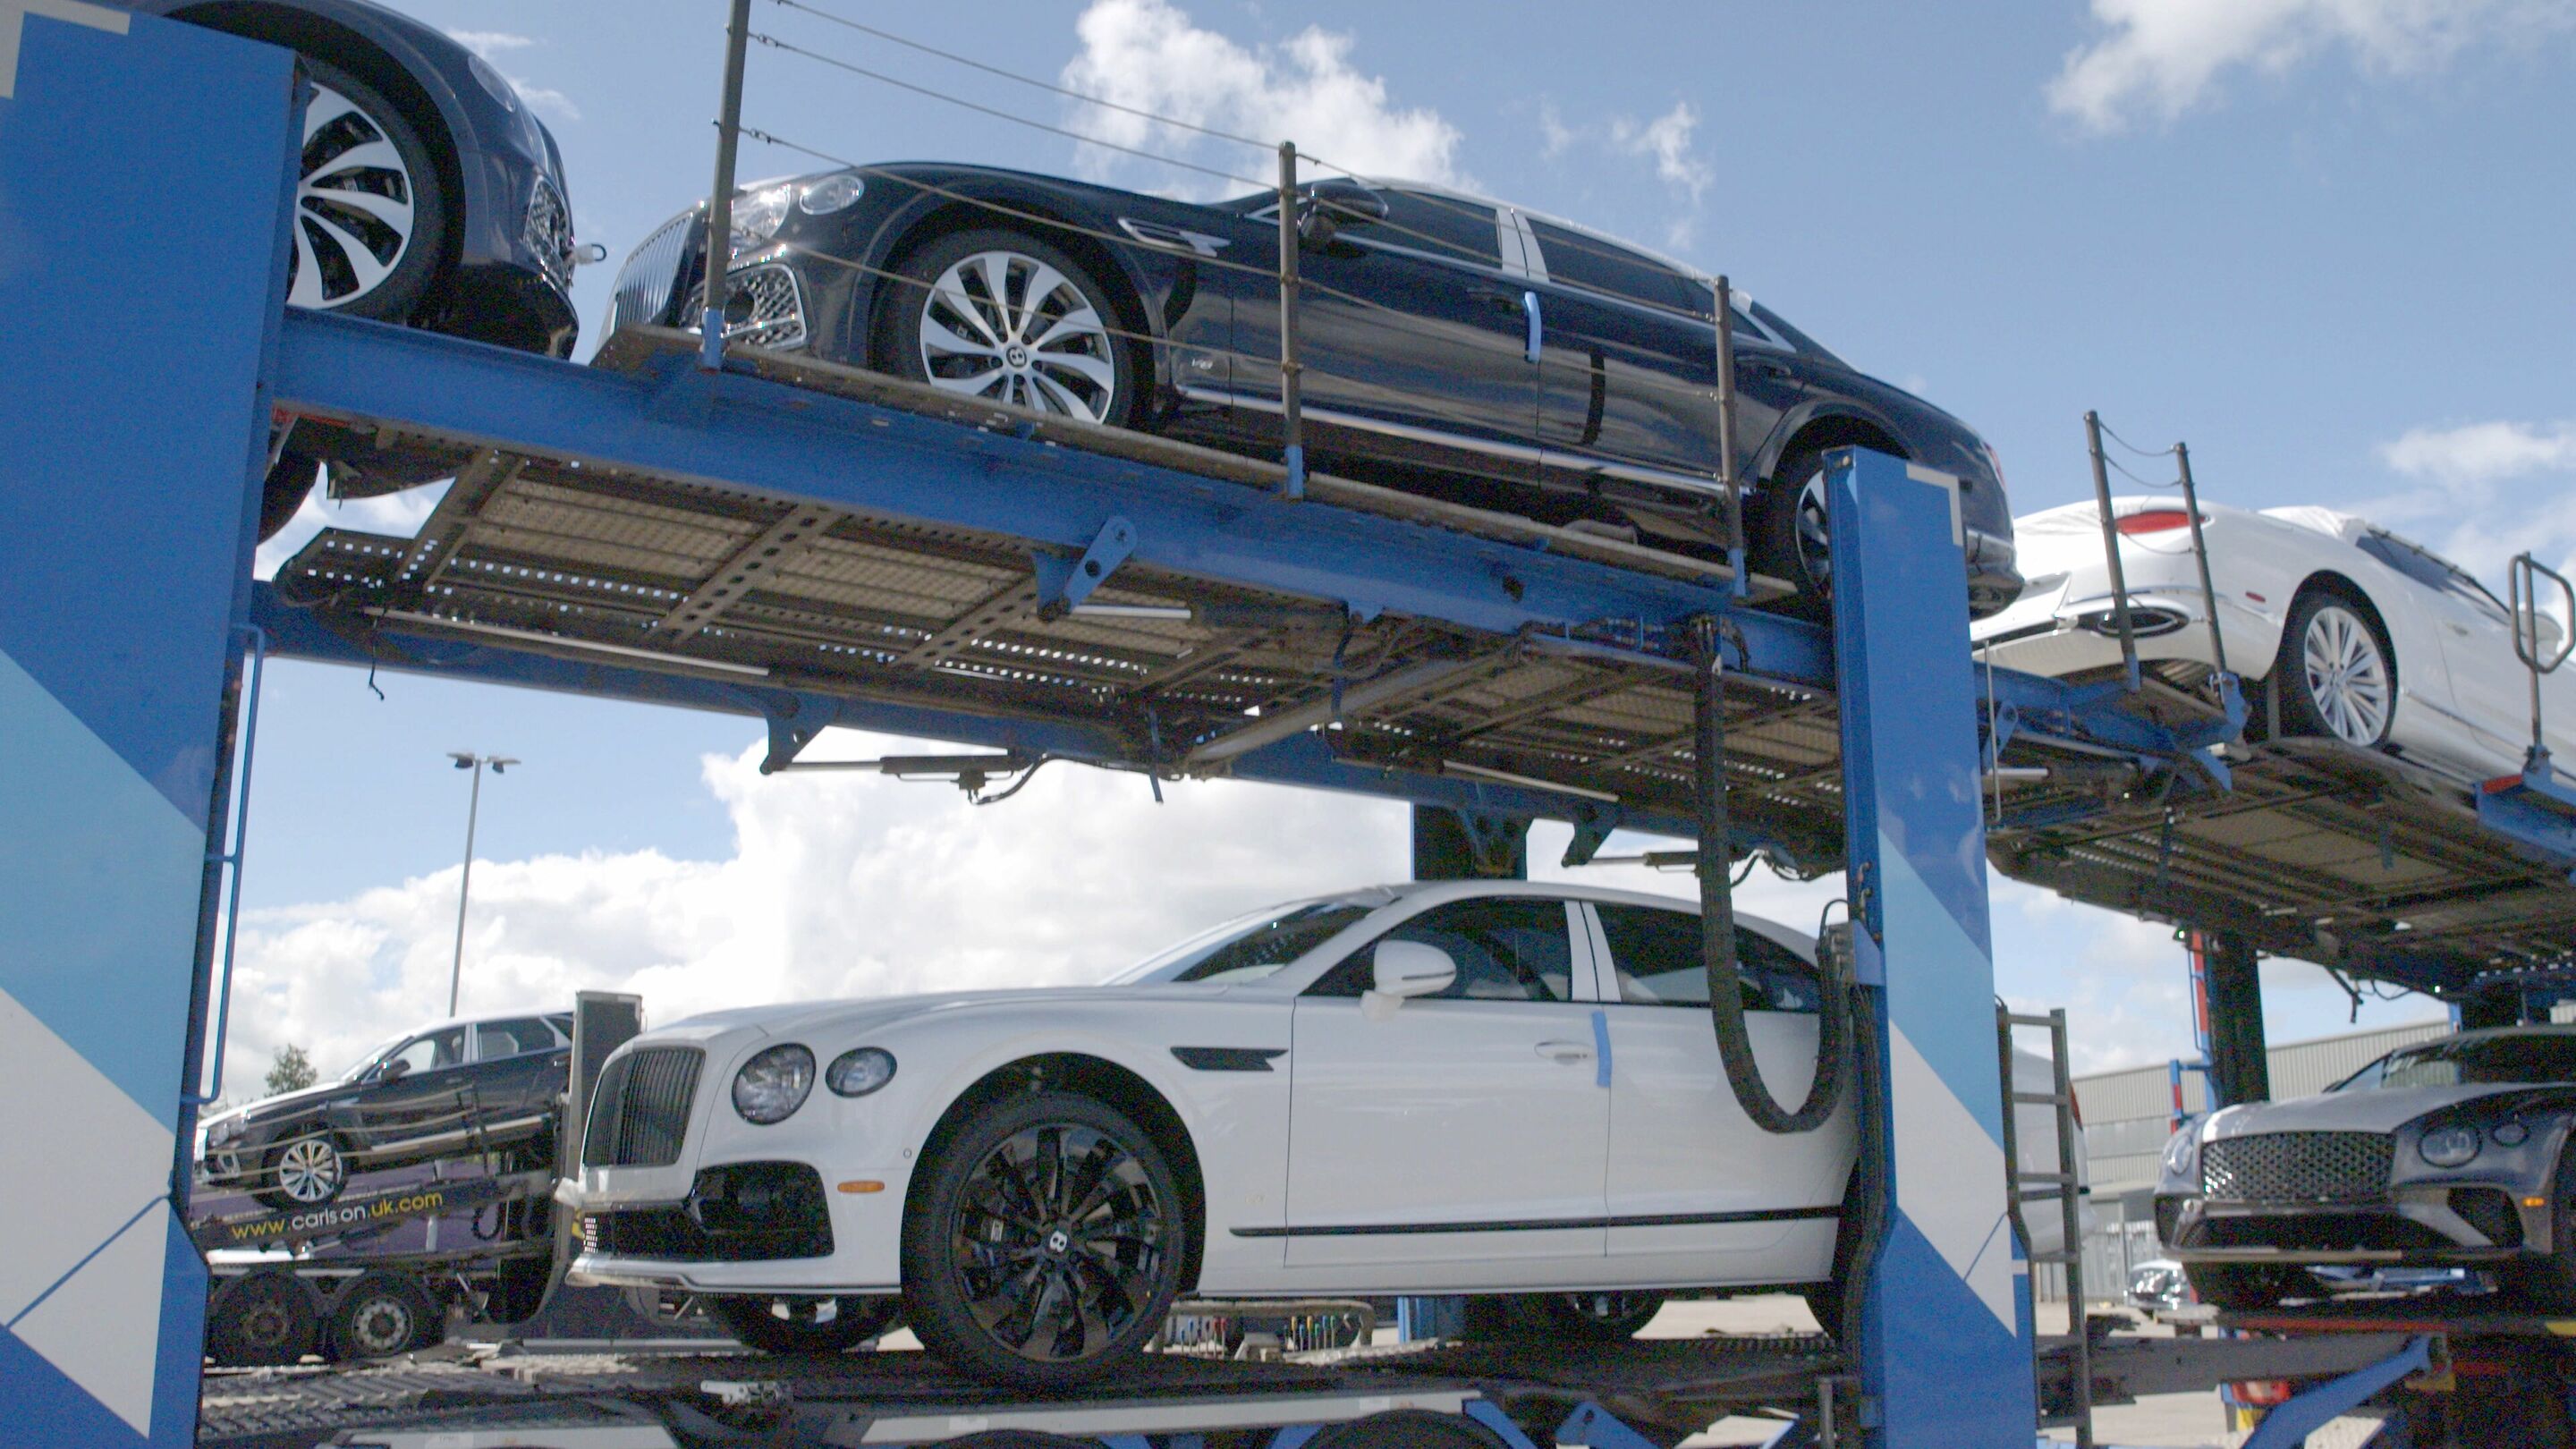 Bentley Motors first to receive South Pole’s “Net Zero Plastic to Nature” Status